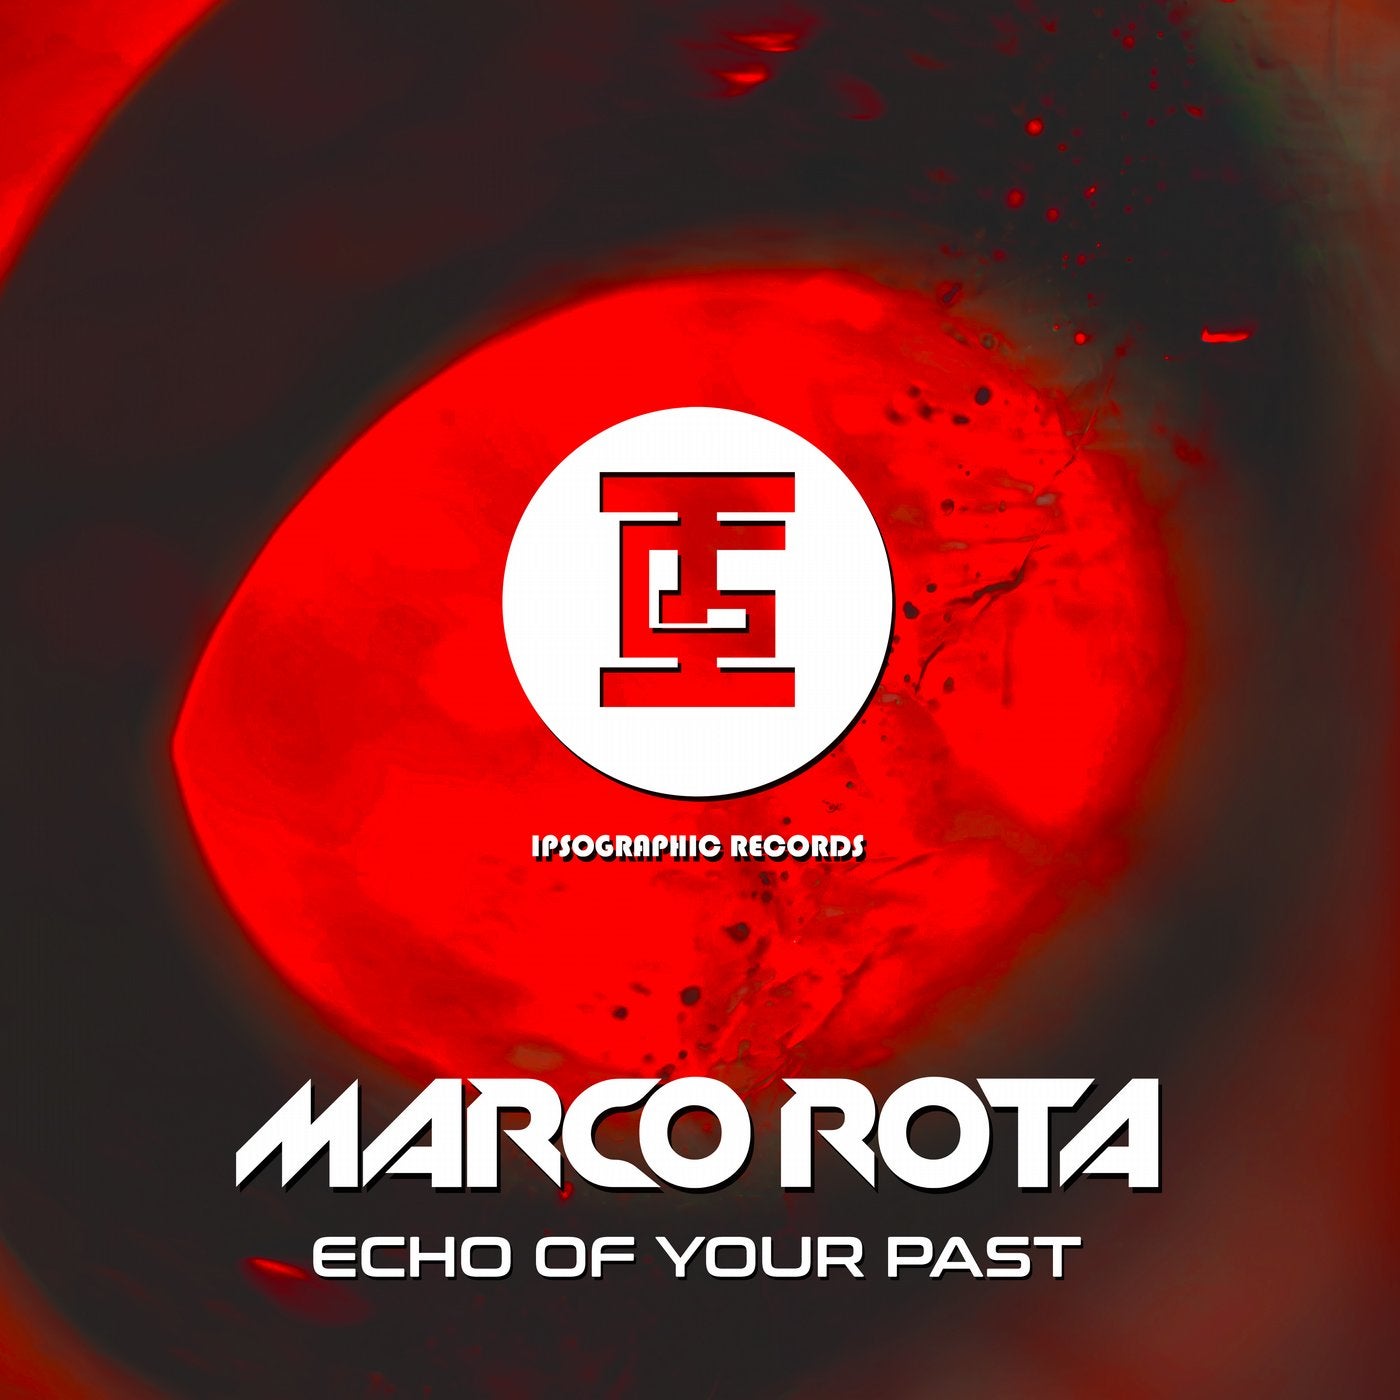 Echo of Your Past